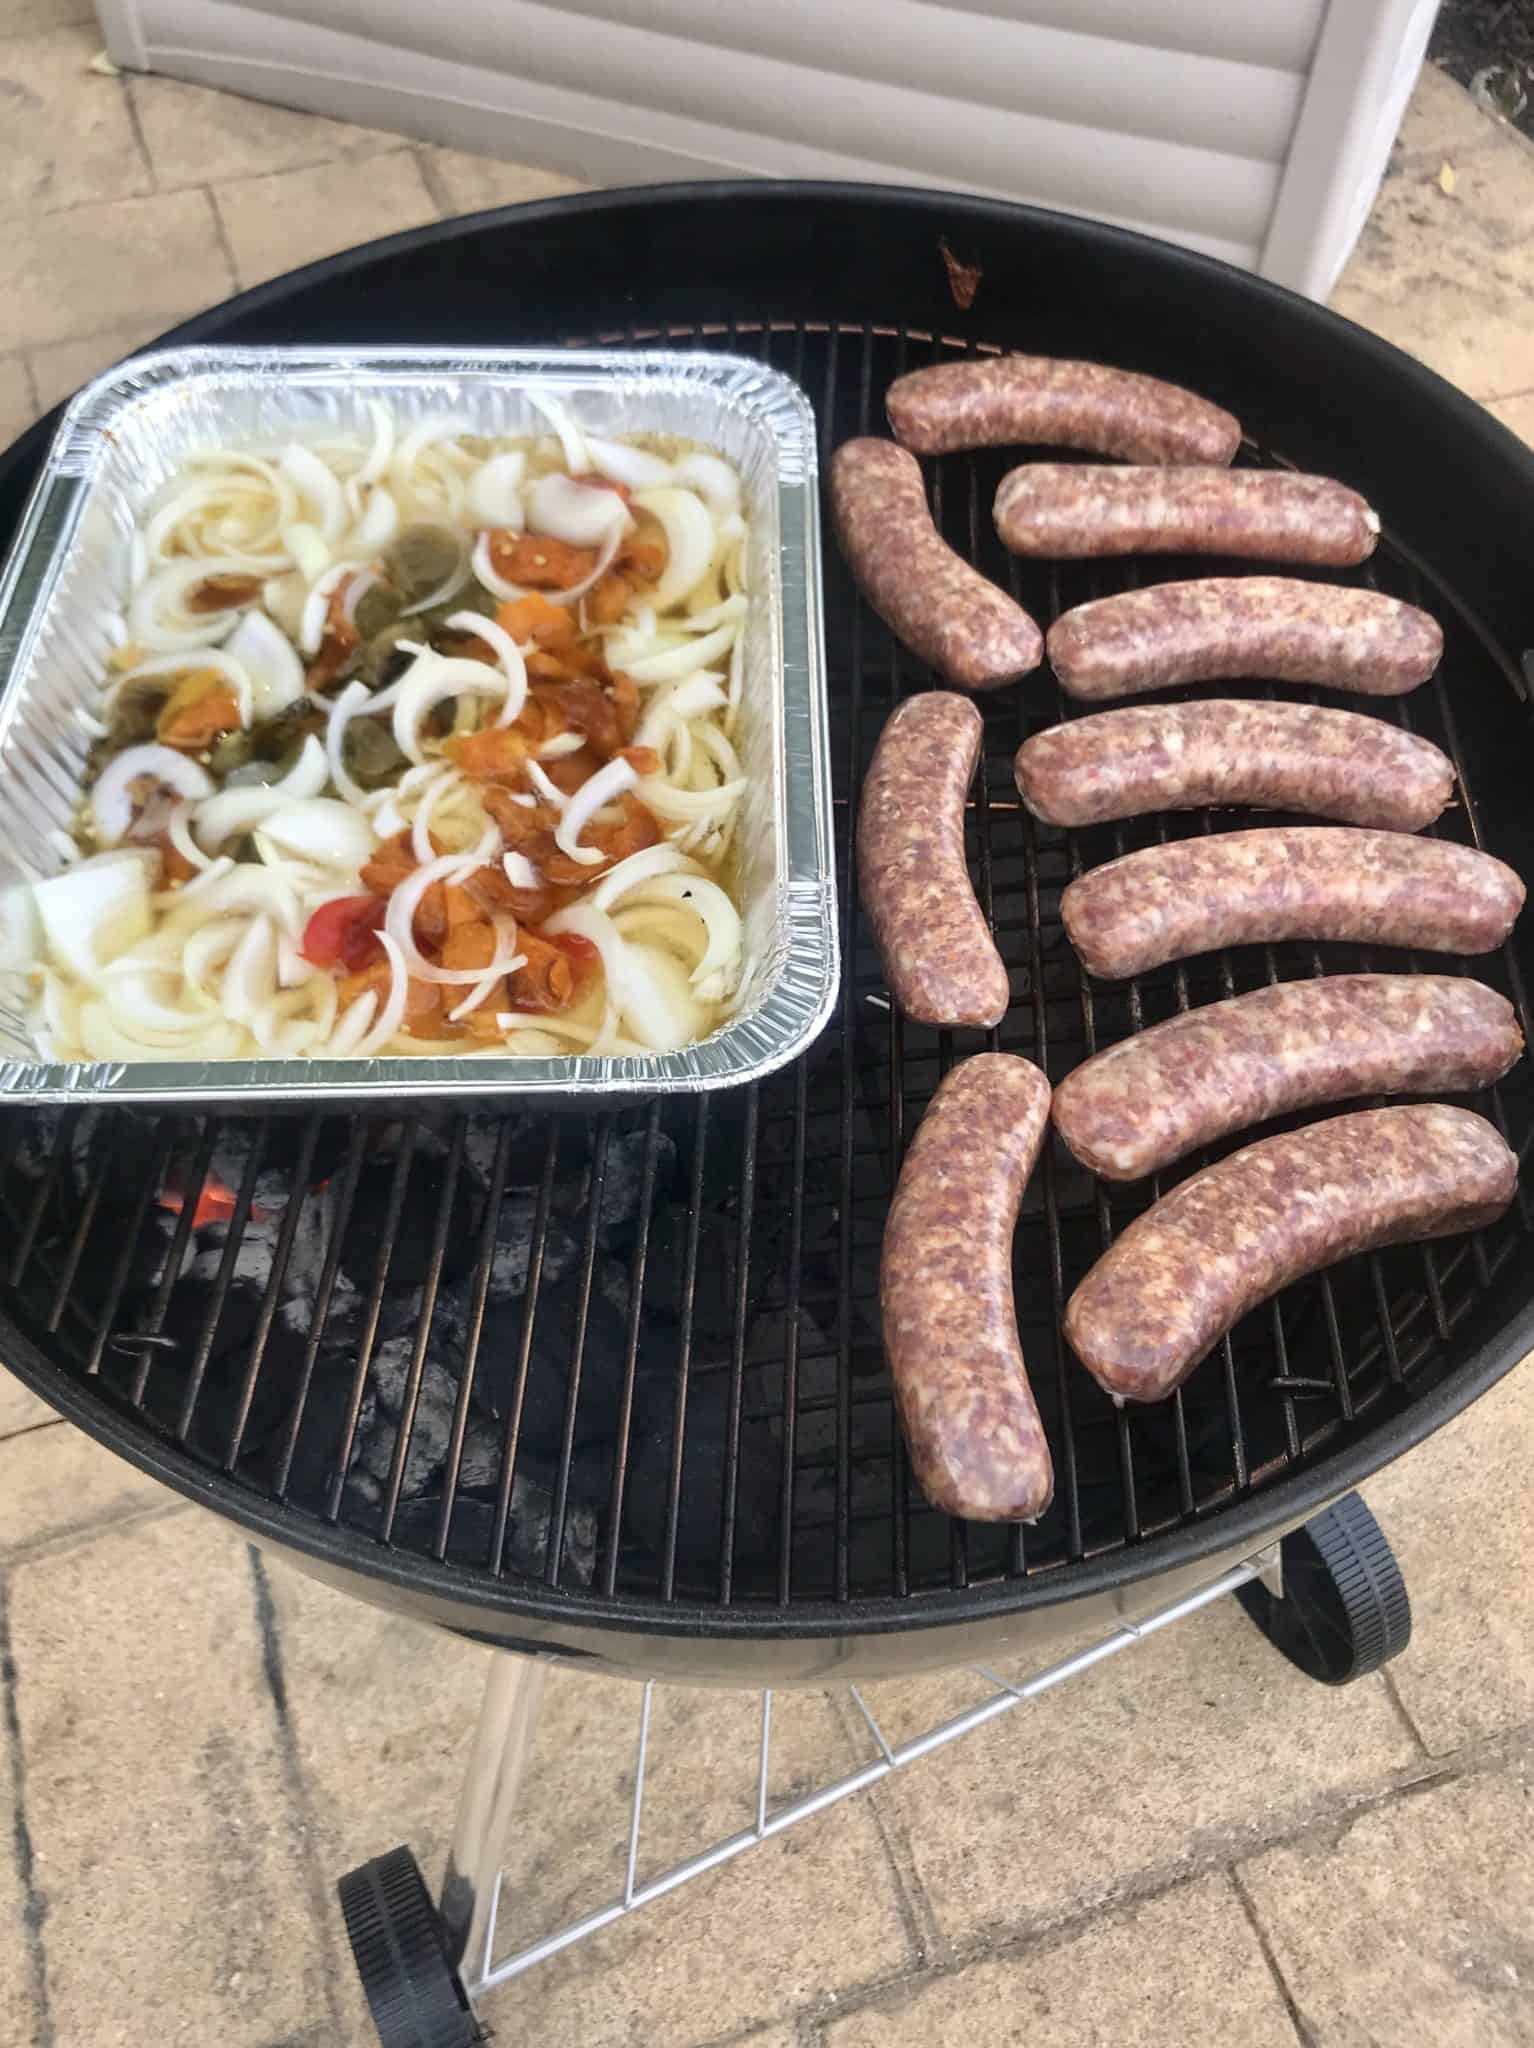 Sausage and Peppers uncooked on weber grill side view